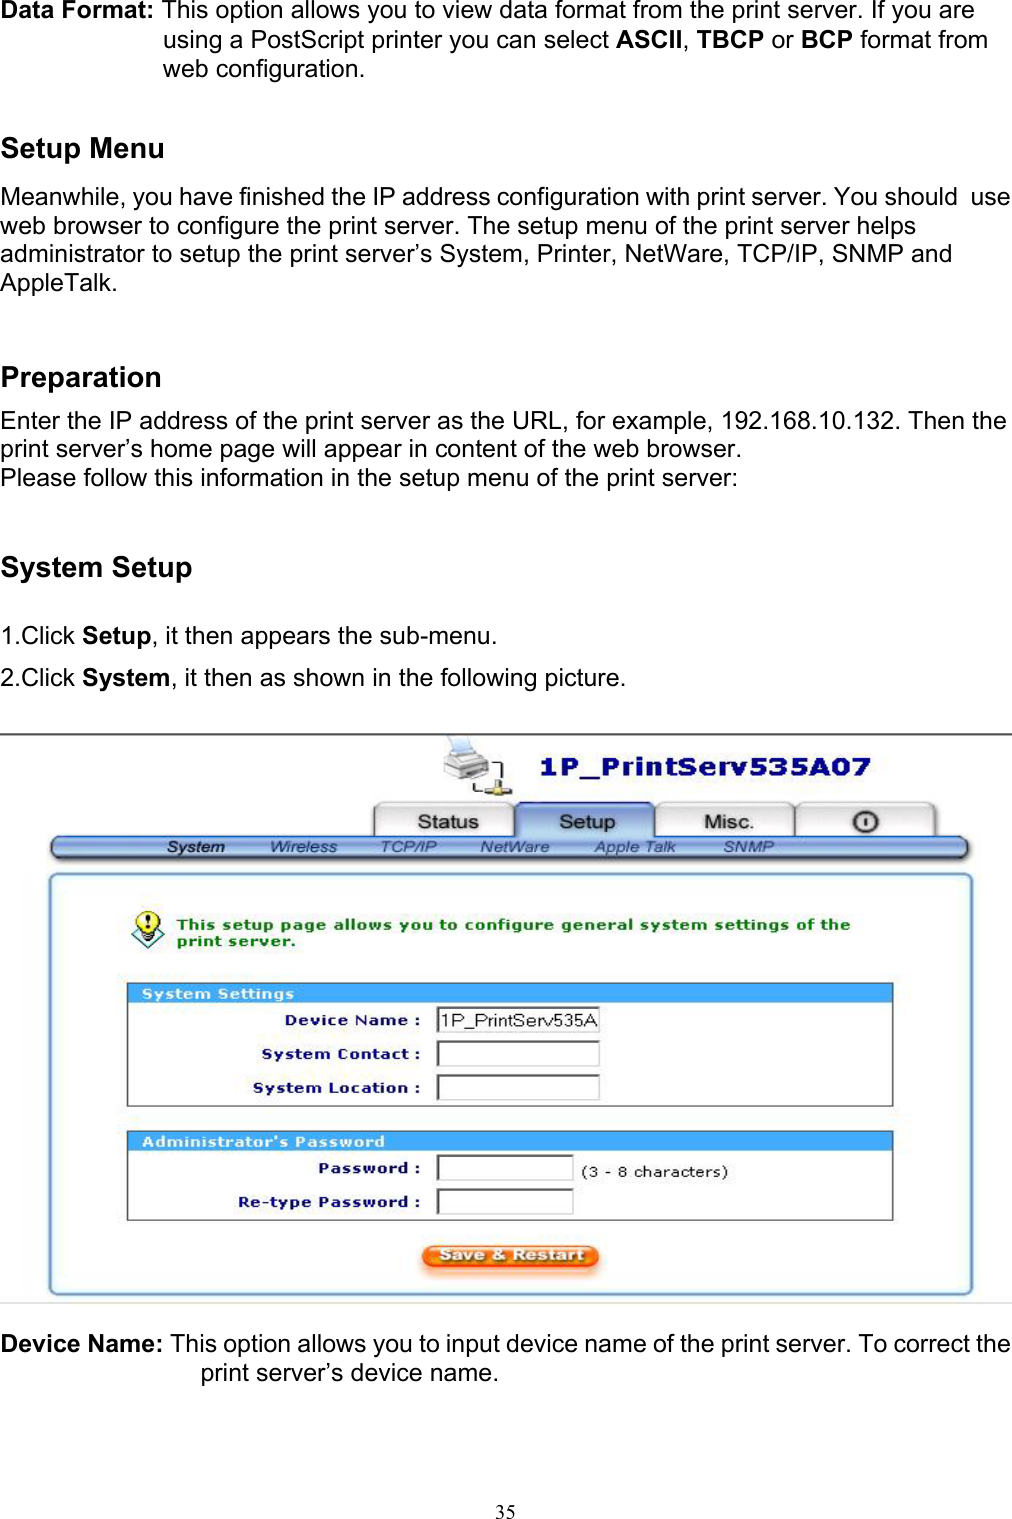                                                                                             35  Data Format: This option allows you to view data format from the print server. If you are using a PostScript printer you can select ASCII, TBCP or BCP format from web configuration.   Setup Menu Meanwhile, you have finished the IP address configuration with print server. You should  use web browser to configure the print server. The setup menu of the print server helps administrator to setup the print server’s System, Printer, NetWare, TCP/IP, SNMP and AppleTalk.   Preparation Enter the IP address of the print server as the URL, for example, 192.168.10.132. Then the print server’s home page will appear in content of the web browser. Please follow this information in the setup menu of the print server:   System Setup  1.Click Setup, it then appears the sub-menu. 2.Click System, it then as shown in the following picture.    Device Name: This option allows you to input device name of the print server. To correct the print server’s device name. 